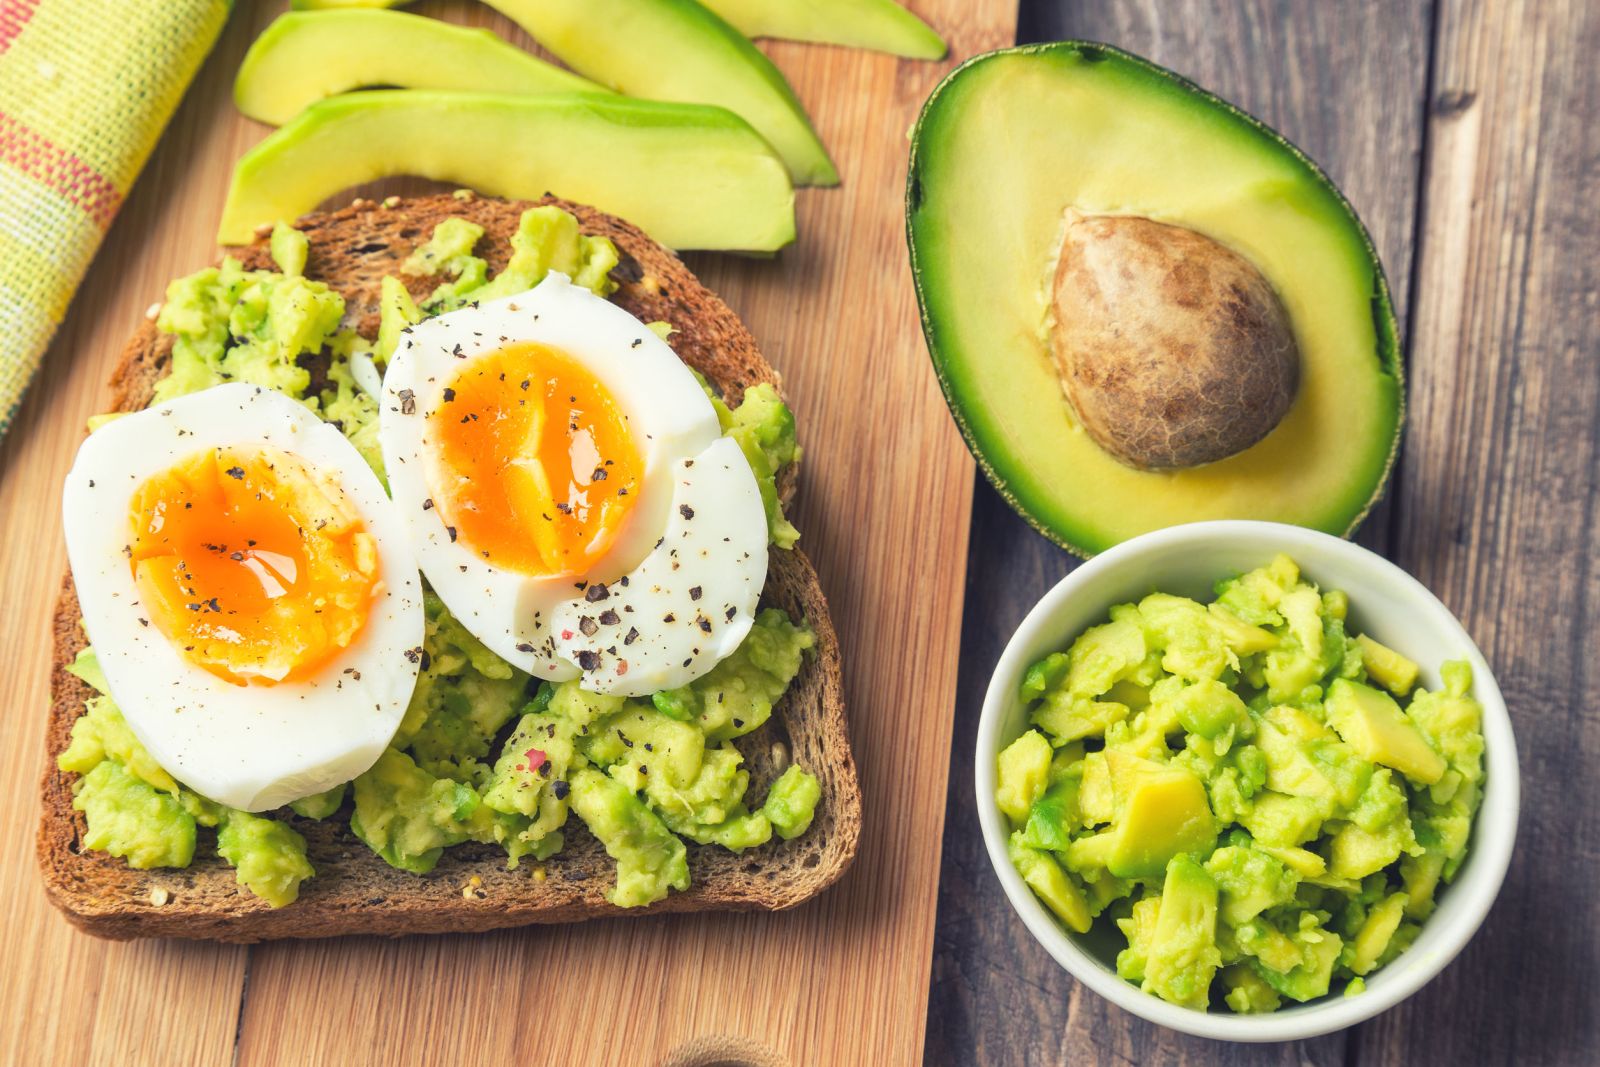 The fat in the avocado and the protein in the egg create a low-calorie dish